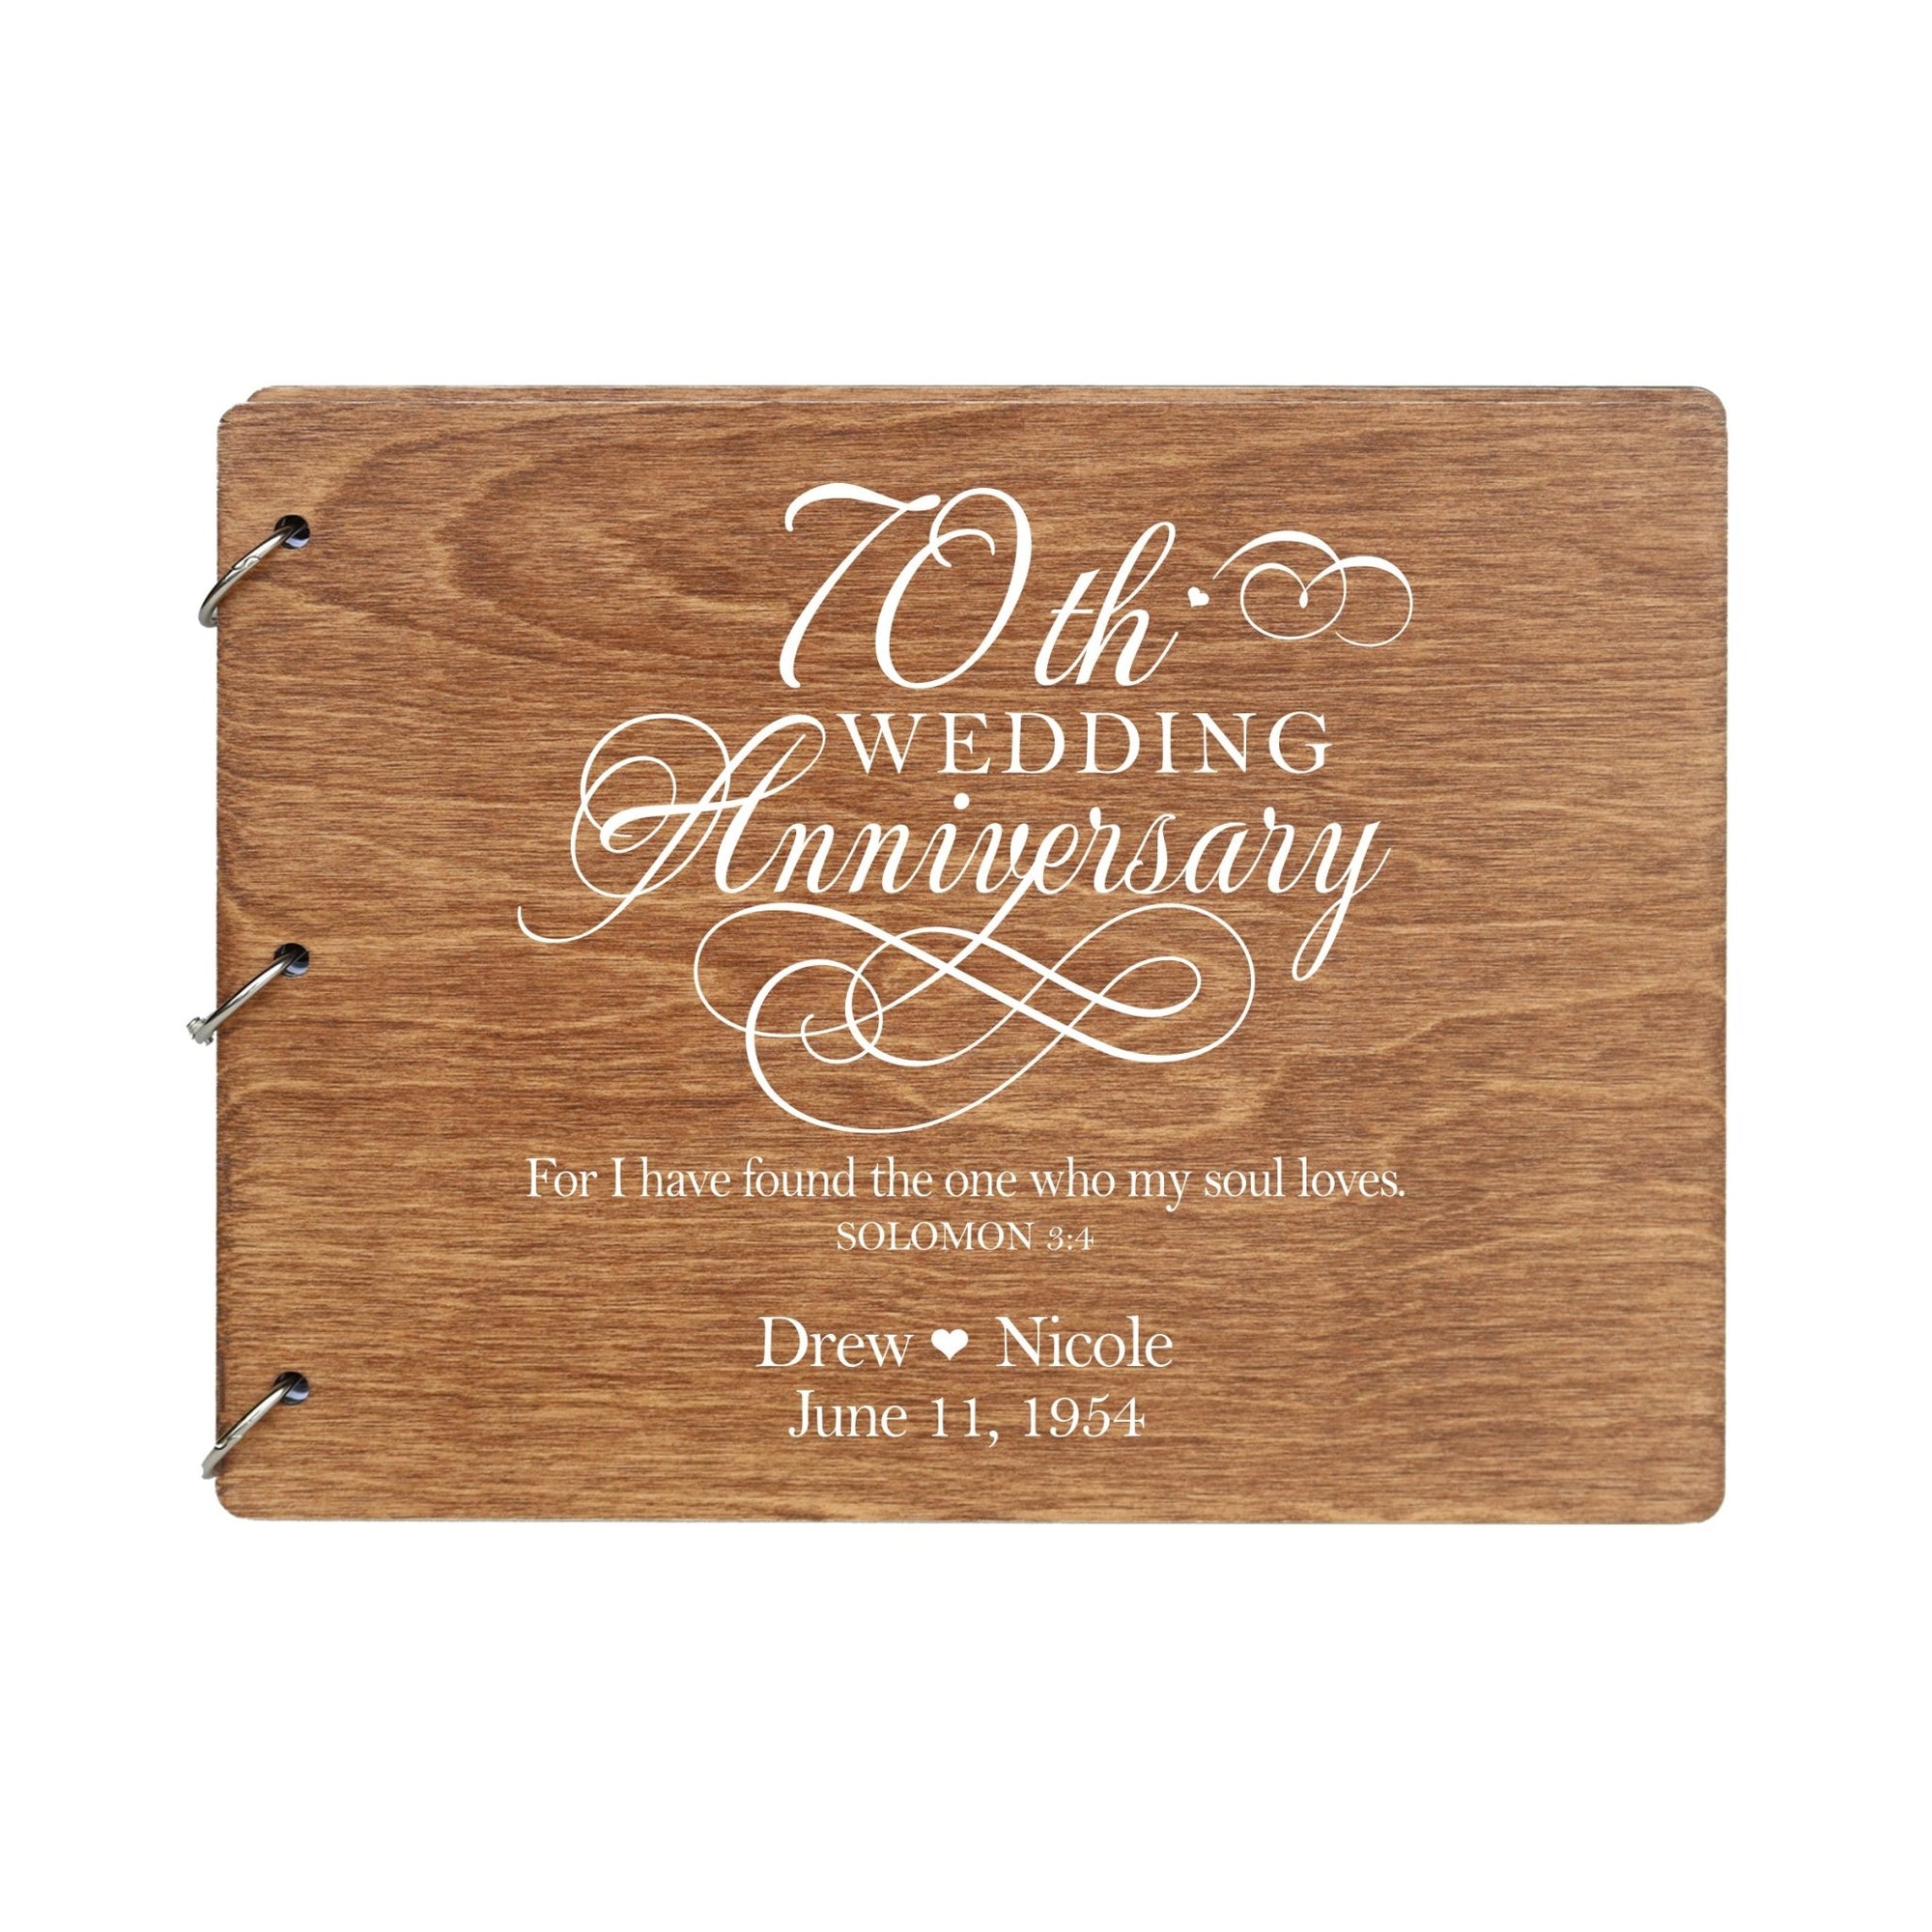 Personalized 70th Wedding Anniversary Guestbook - LifeSong Milestones